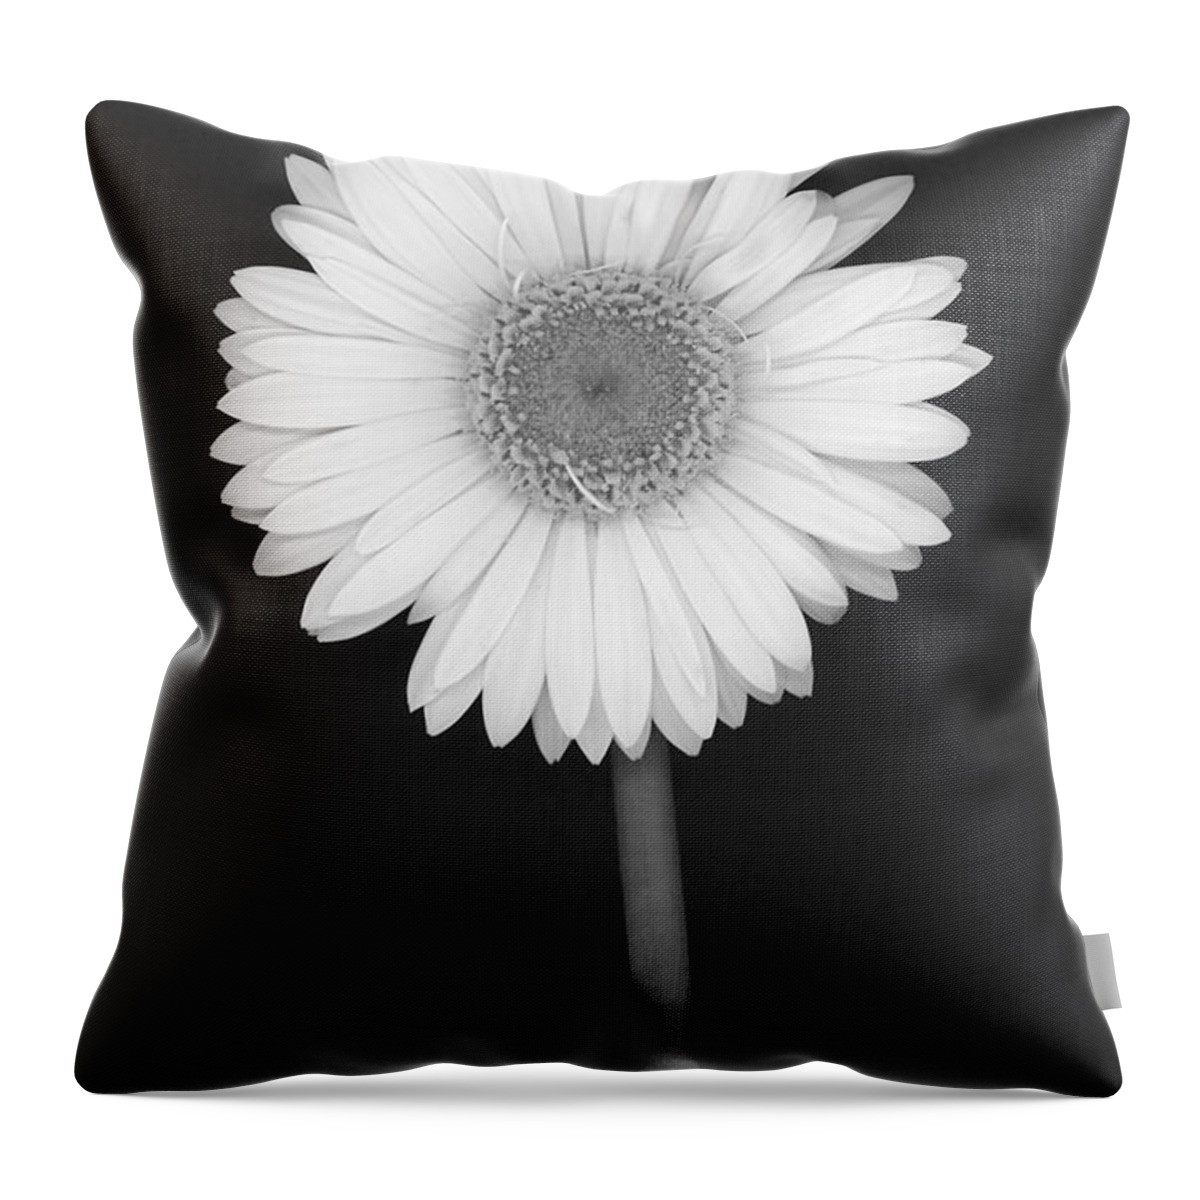 Flower Throw Pillow featuring the photograph White Gerbera Daisy in Black and White by Suzanne Gaff